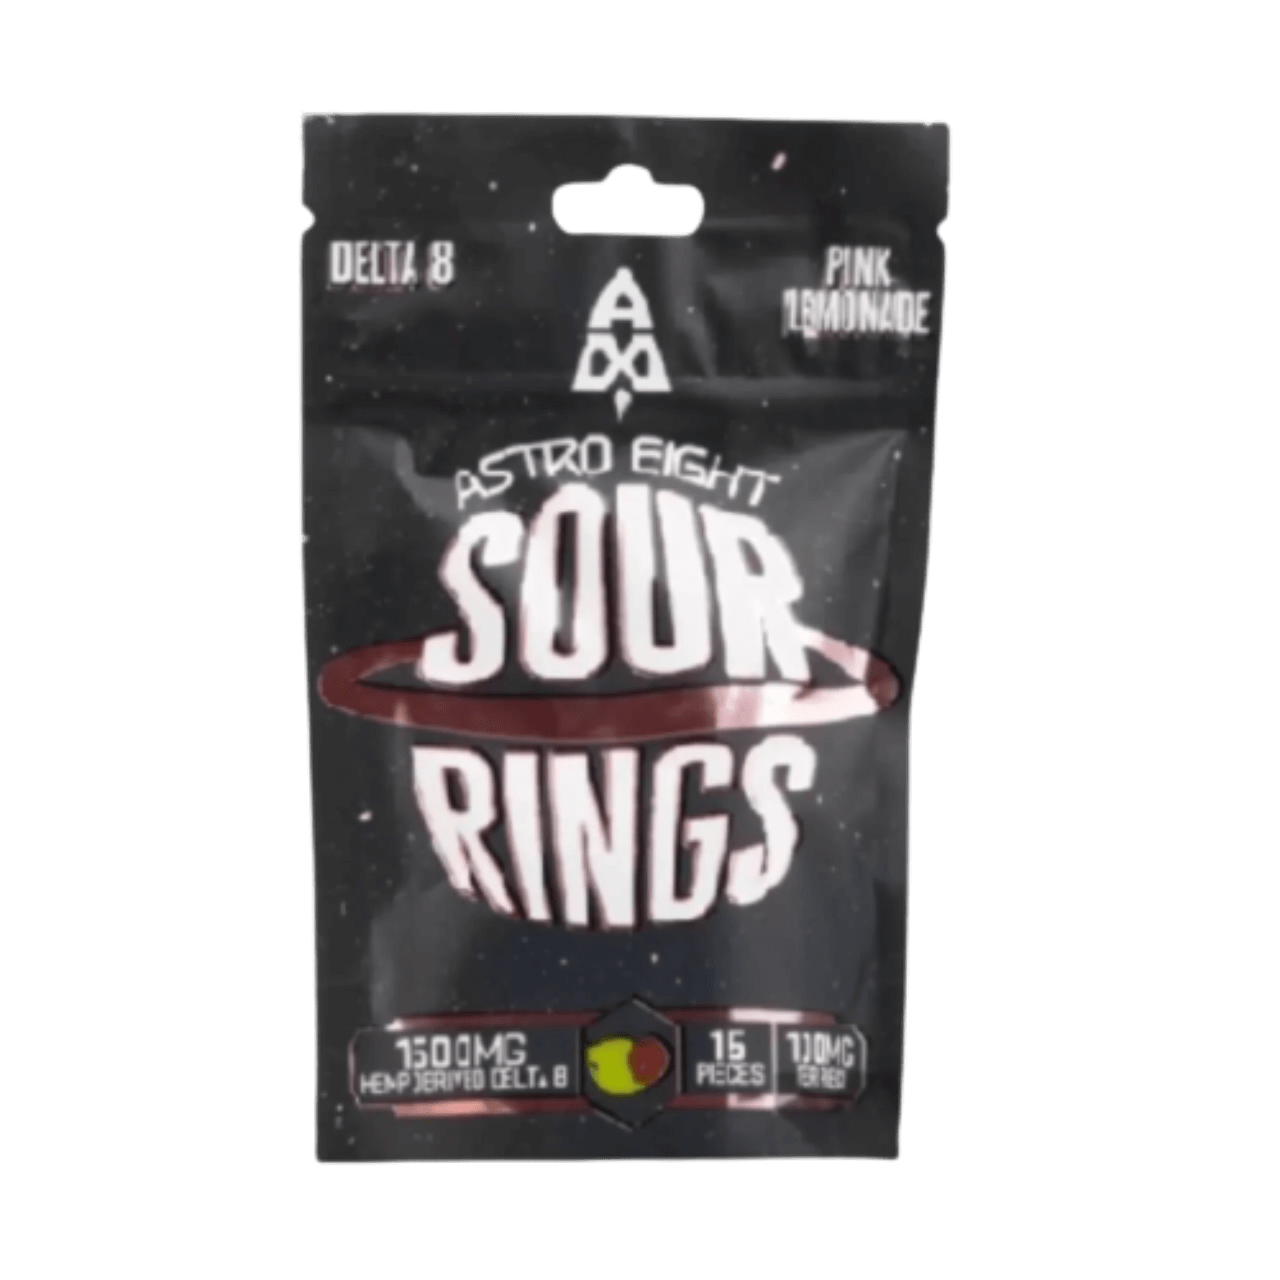 Astro Eight Sour Rings Delta 8 Gummies - 1500mg